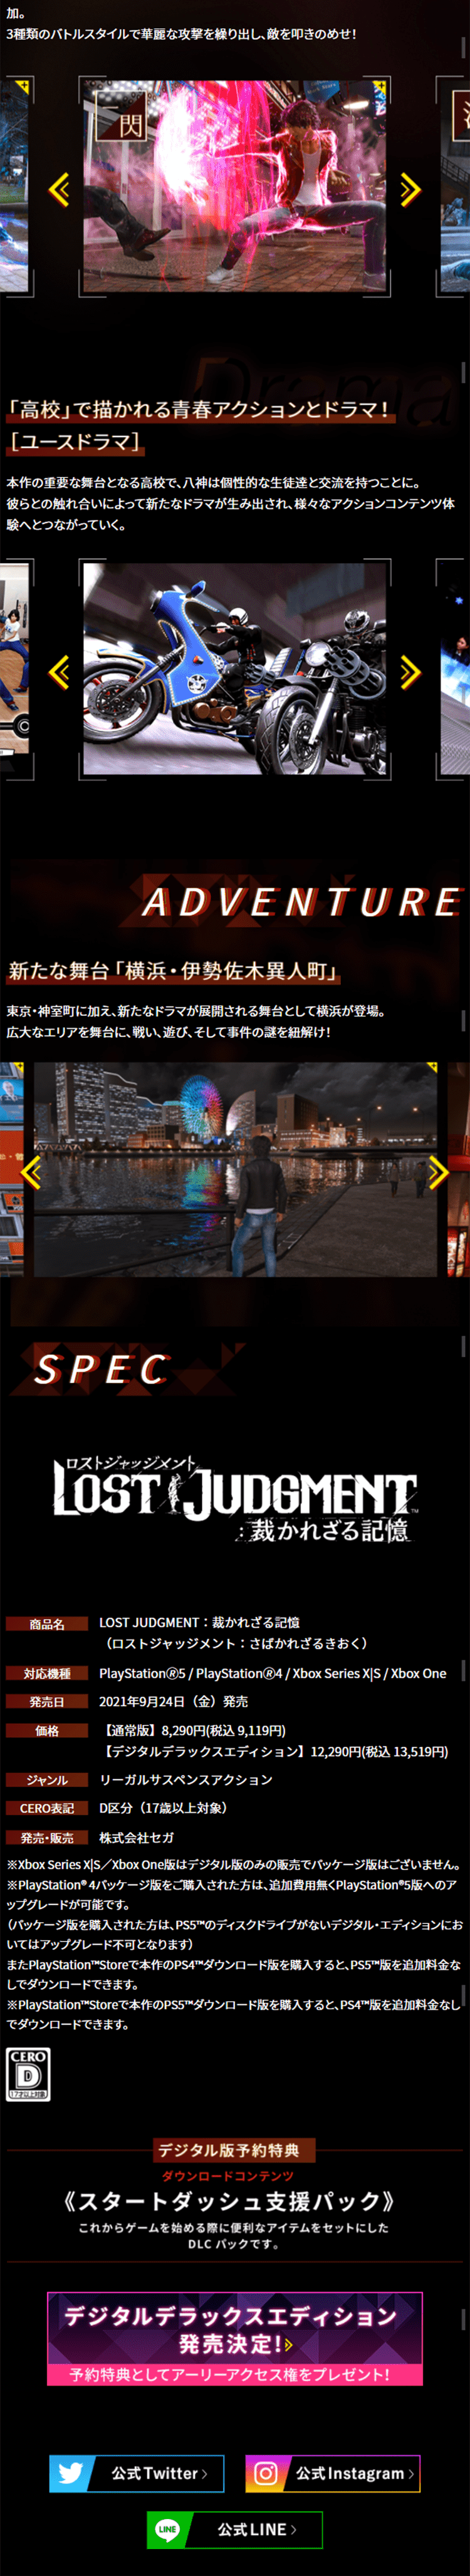 LOST JUDGMENT 裁かれざる記憶_sp_2